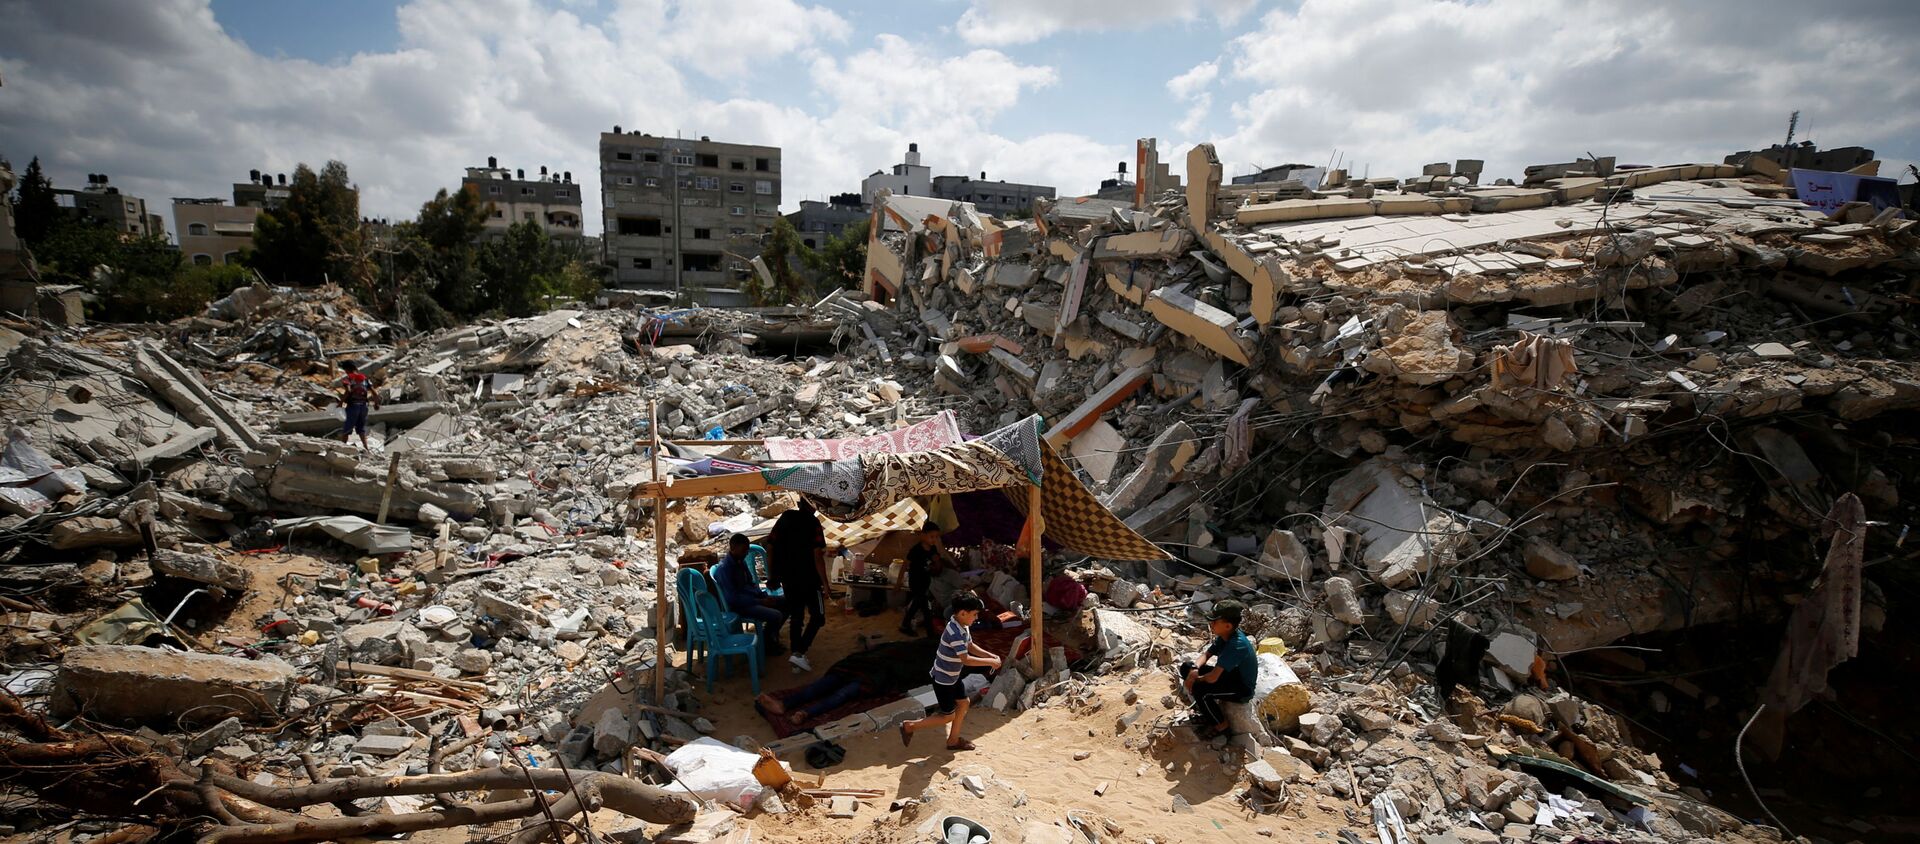 Palestinians sit in a makeshift tent amid the rubble of their houses, which were destroyed by Israeli air strikes during the Israel-Hamas fighting in Gaza, 23 May 2021. REUTERS/Mohammed Salem  TPX IMAGES OF THE DAY - Sputnik International, 1920, 24.05.2021